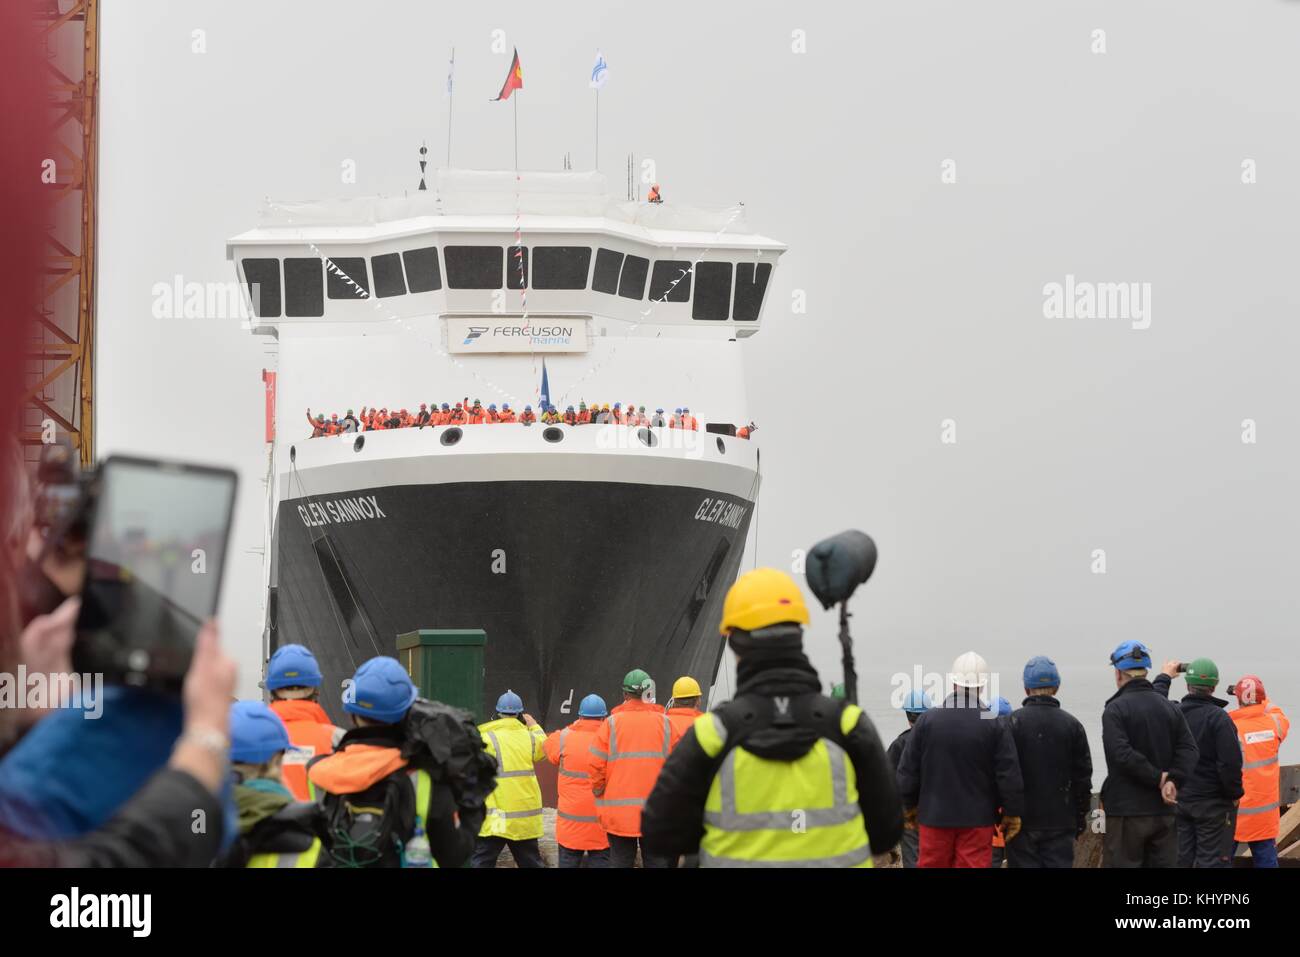 Port Glasgow, Scotland, UK. 21st Nov, 2017. The public, dockers and ship builders at Ferguson Marine in Port Glasgow watch on in the pouring rain as First Minister, Nicola Sturgeon launches the Glen Sannox car ferry on the river Clyde. Stock Photo